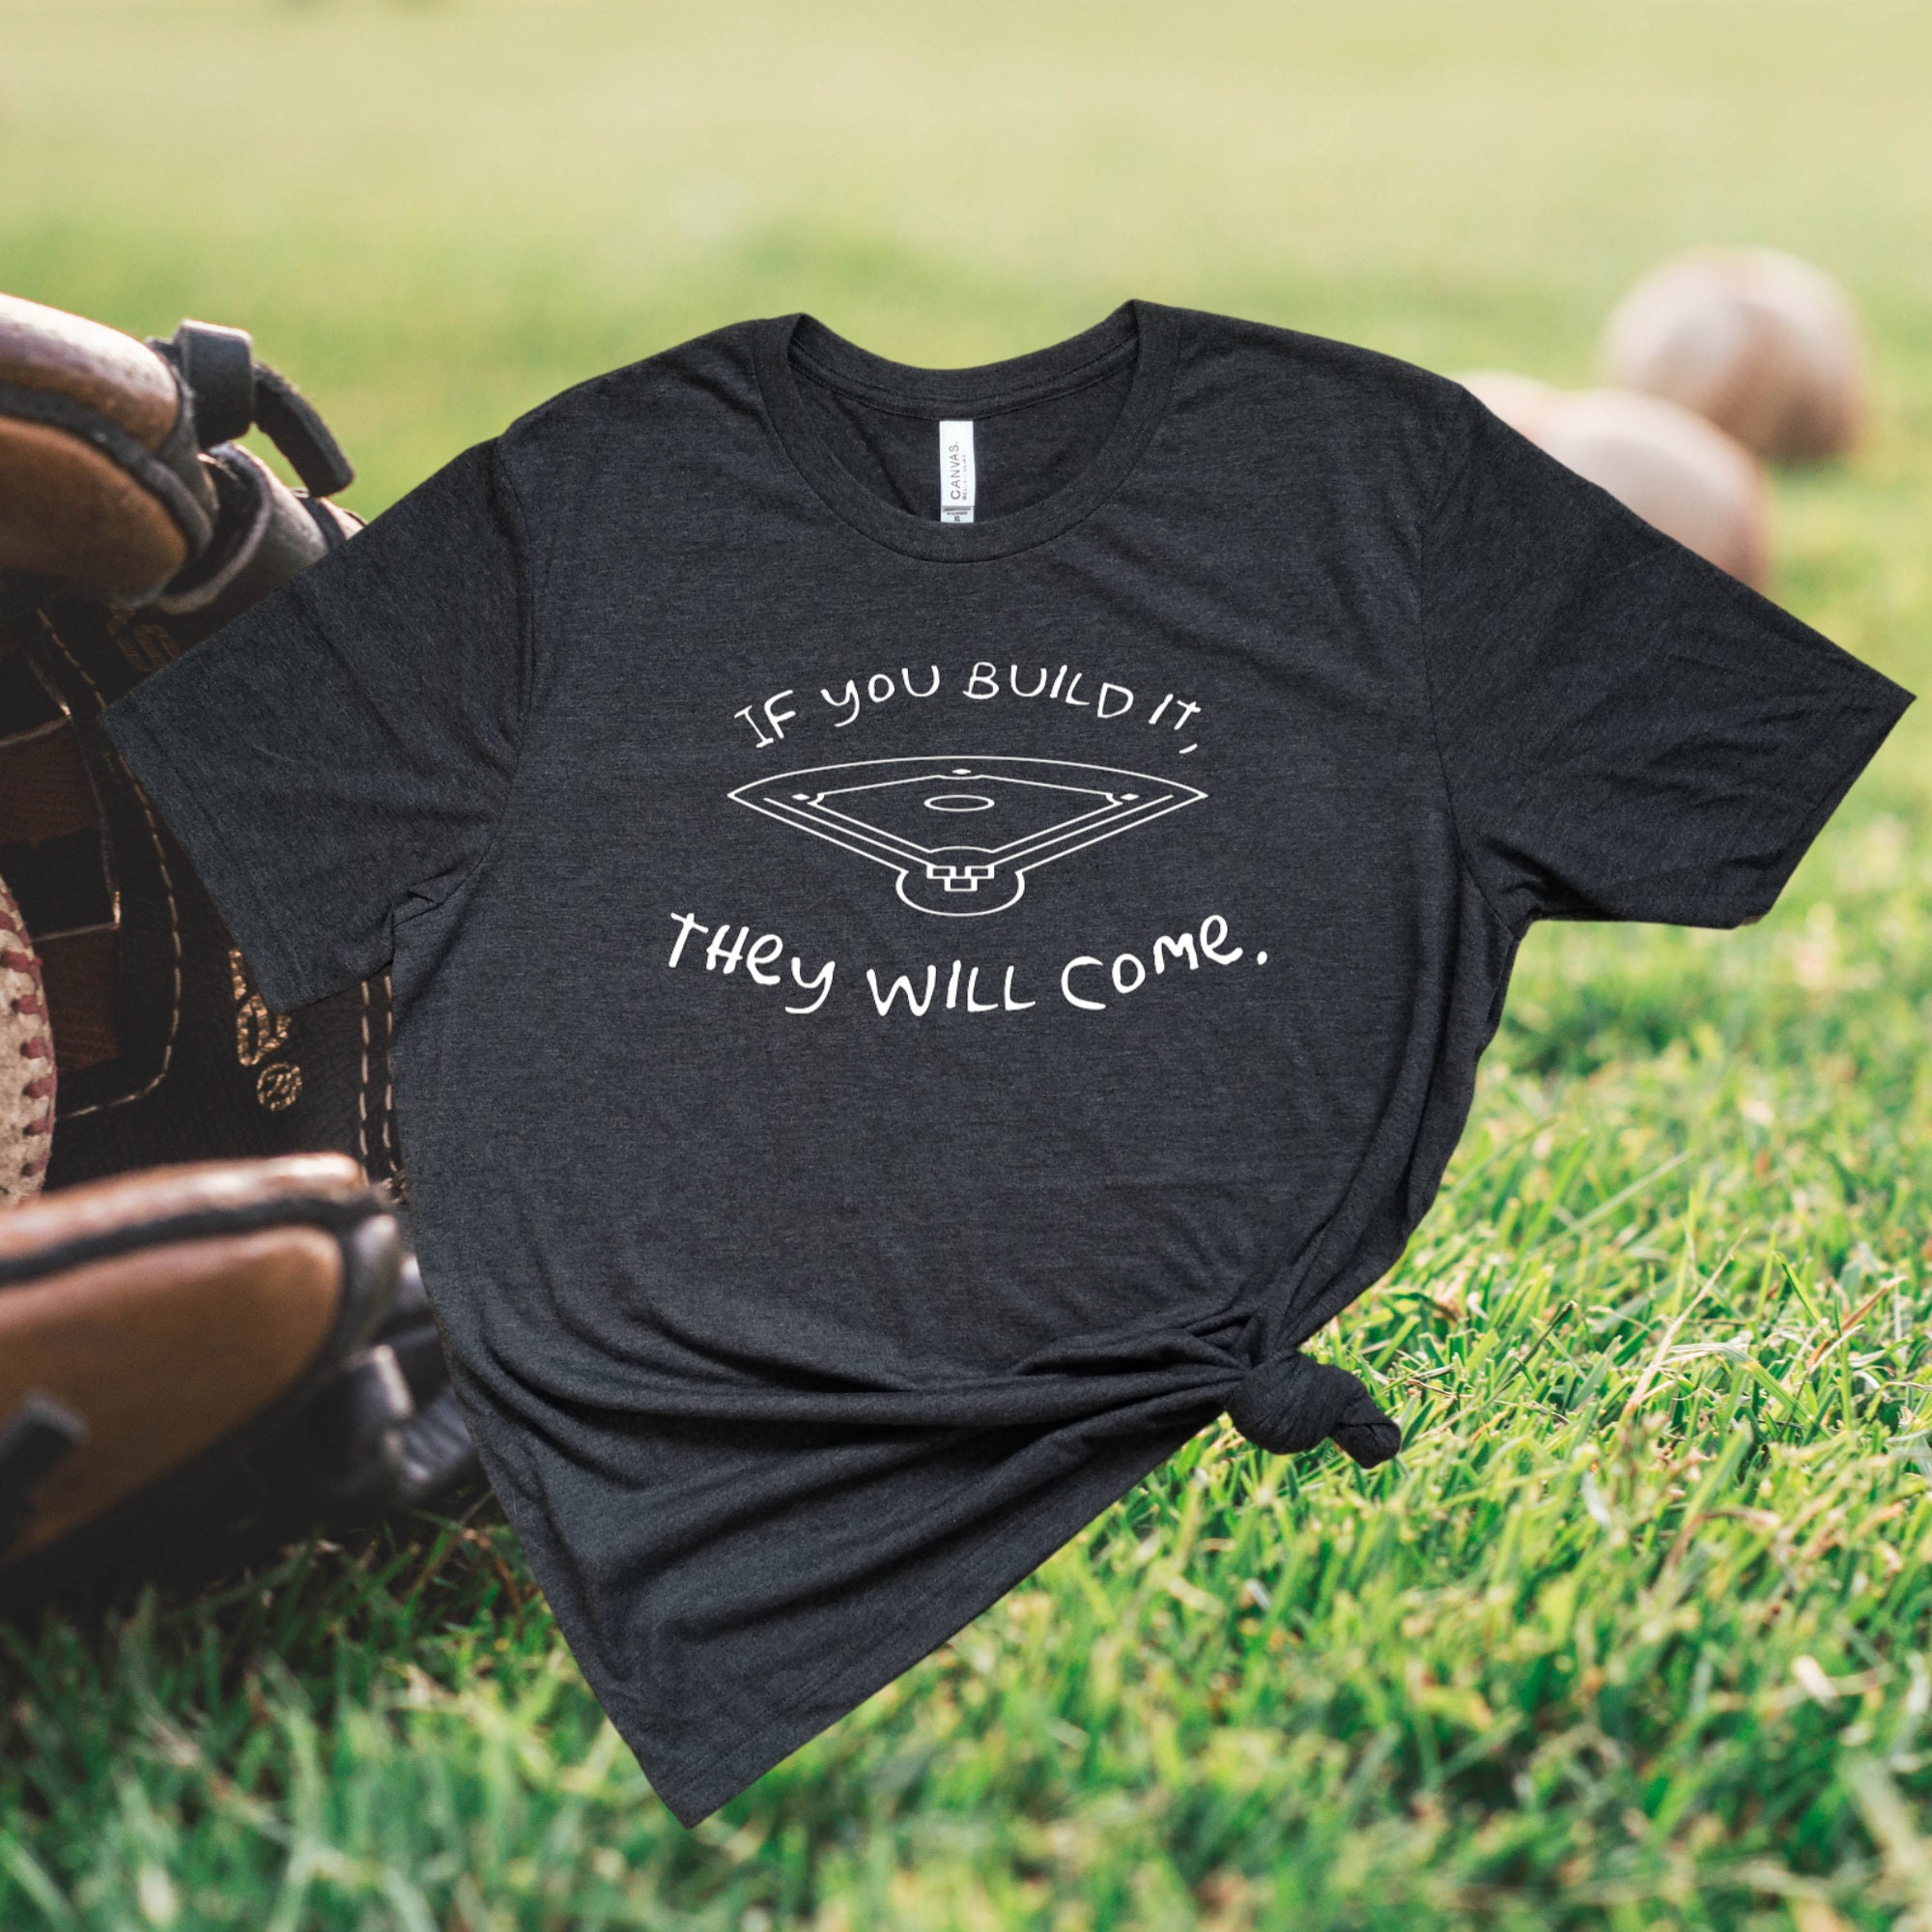 If You Build It They Will Come Baseball T-shirt Field of Dreams T-shirt ...